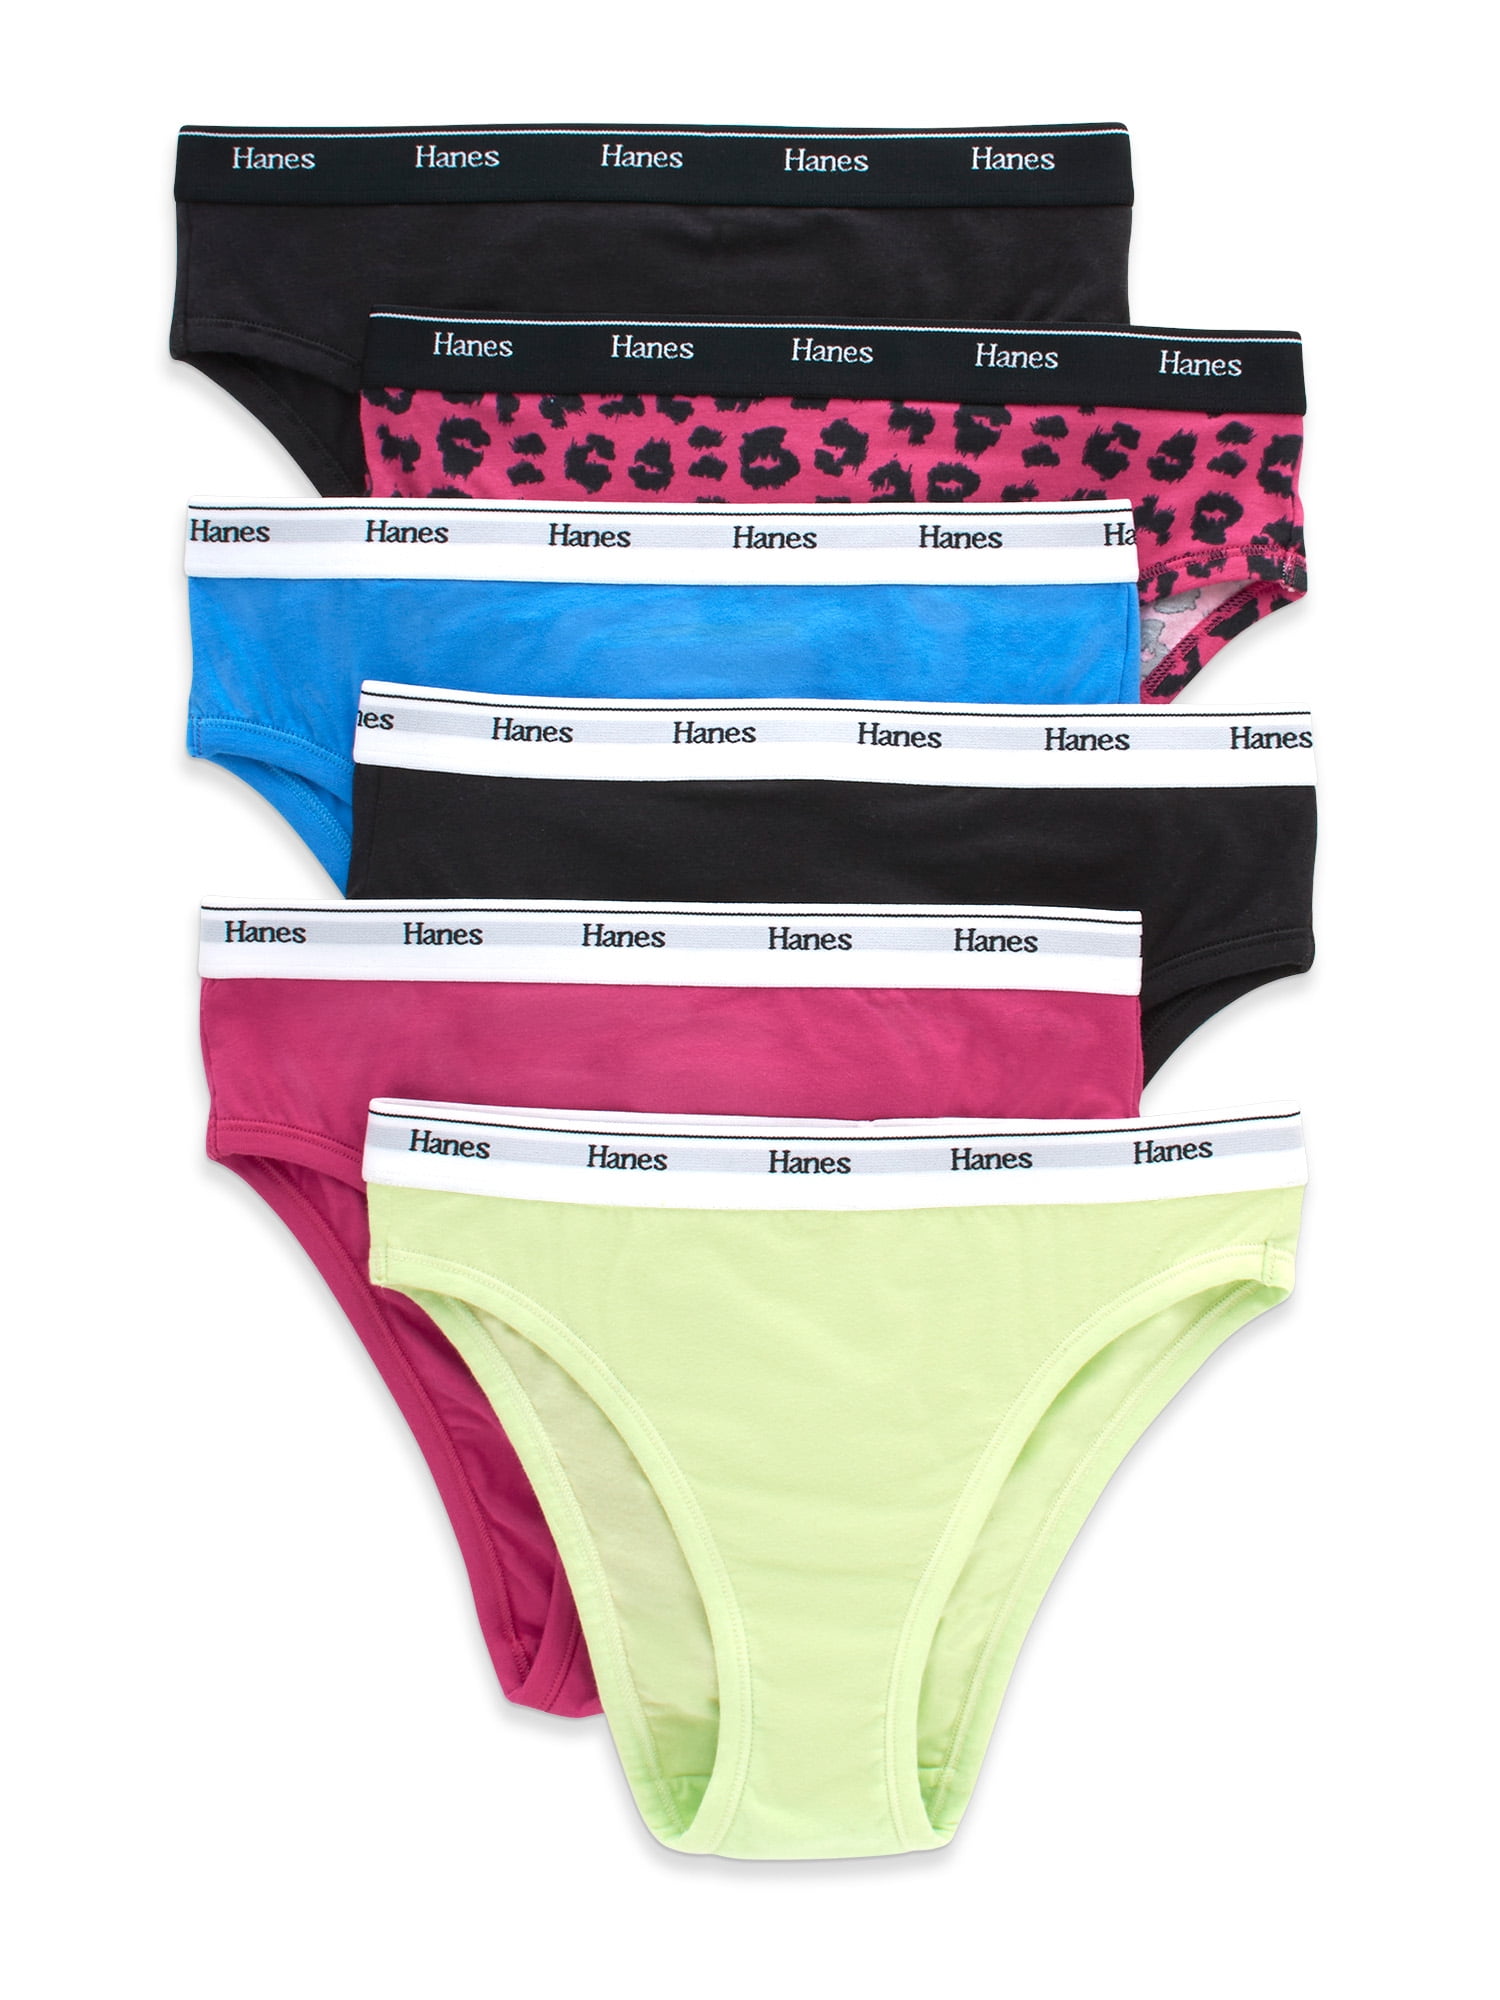 Hanes Women's Originals Hipster Panties, Breathable Stretch Cotton  Underwear, Assorted, 6-Pack, Basic Color Mix, Small at  Women's  Clothing store